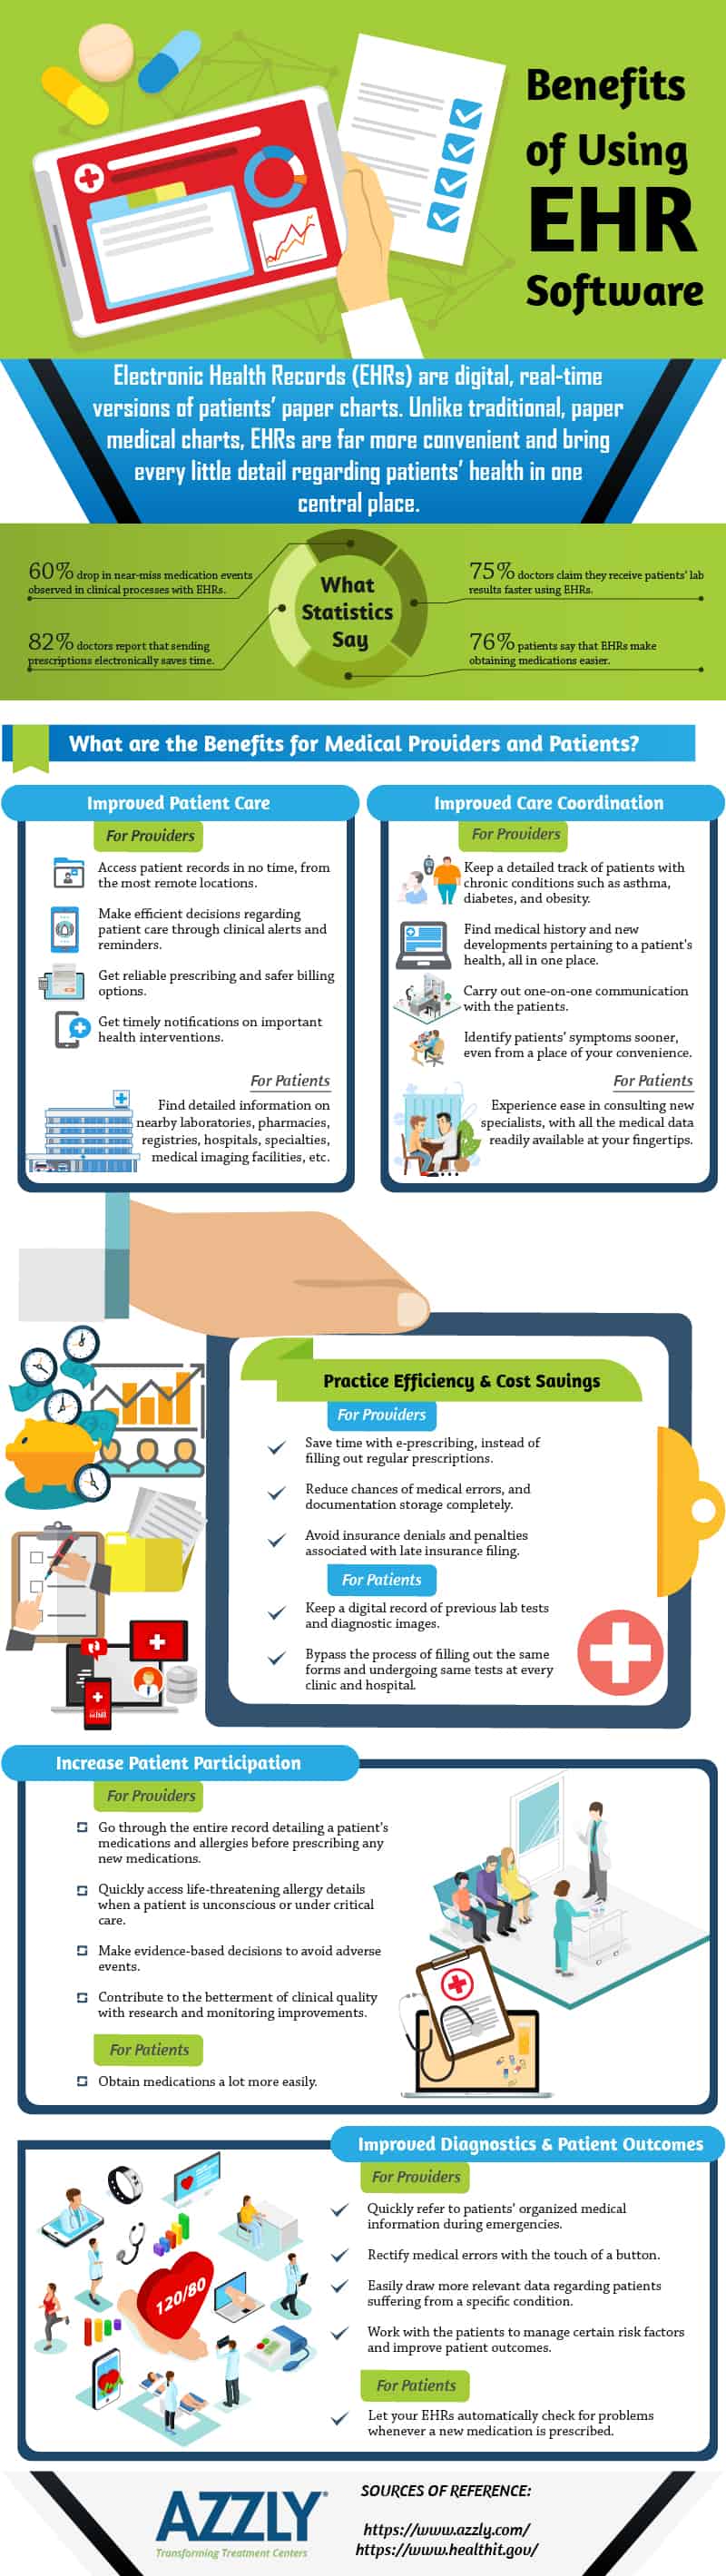 Benefits of Using EHR Software Infographic